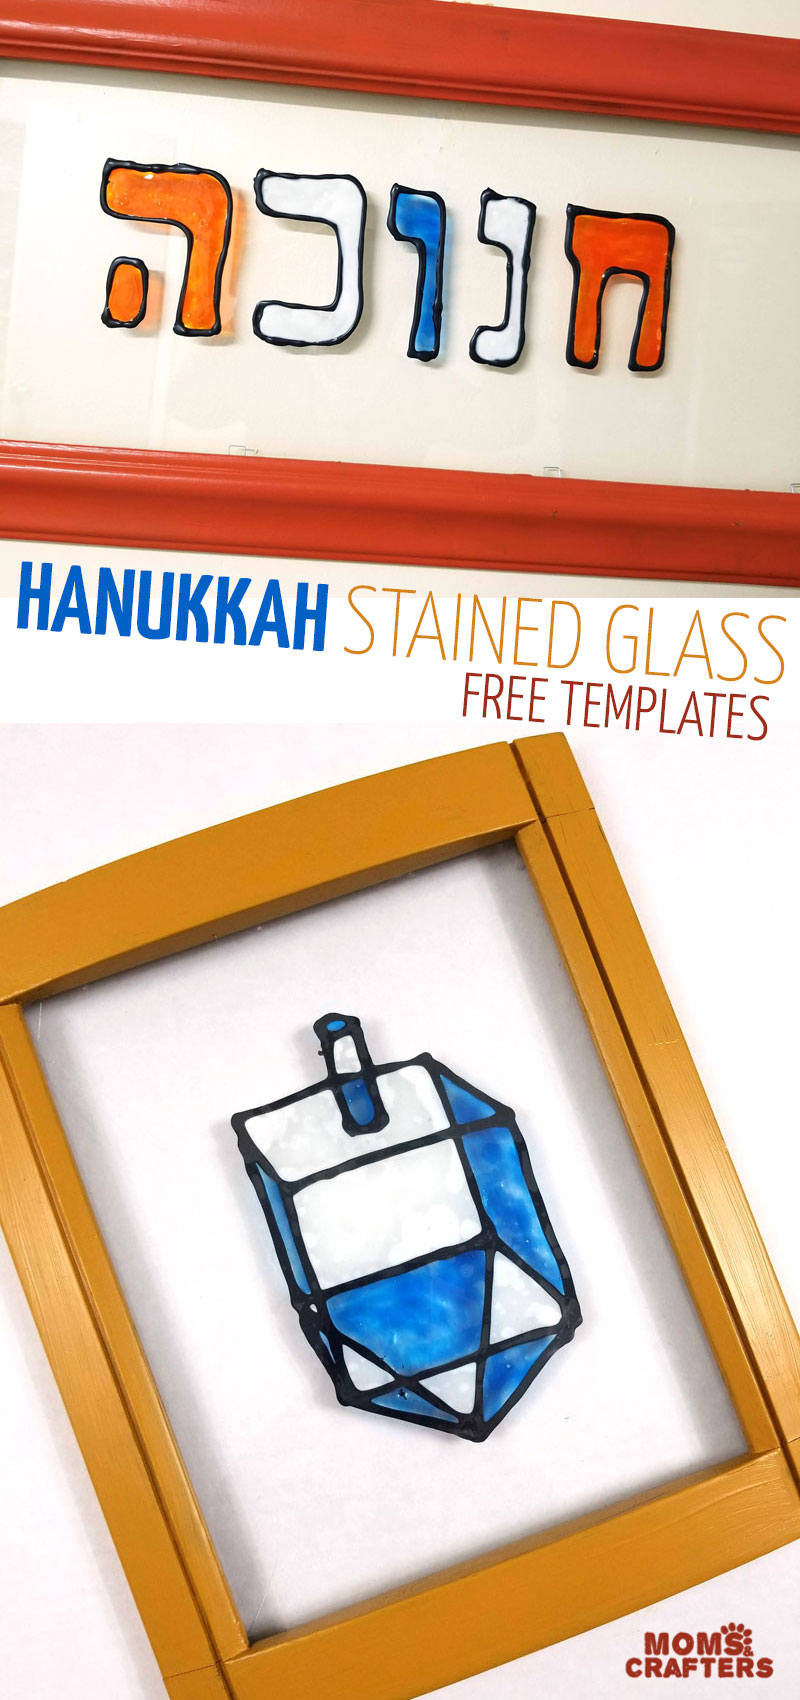 Click for your free printable stained glass Hanukkah window clings templates! This super fun Hanukkah craft for kids is a great way to celebrate the Jewish holidays.